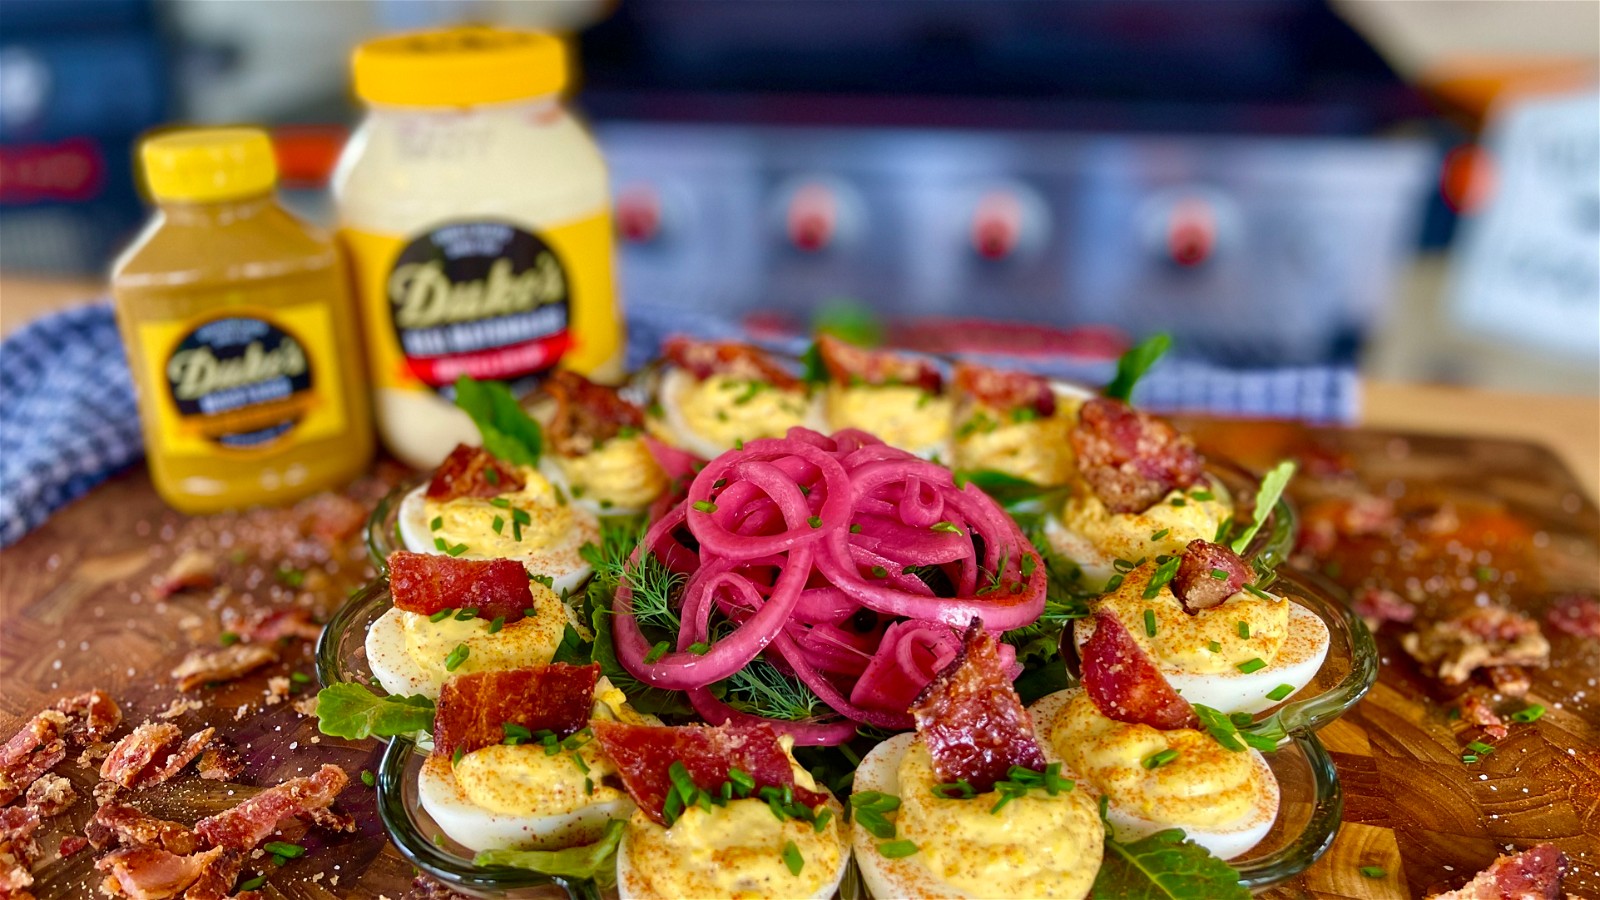 Image of Deviled Eggs with Candied Bacon